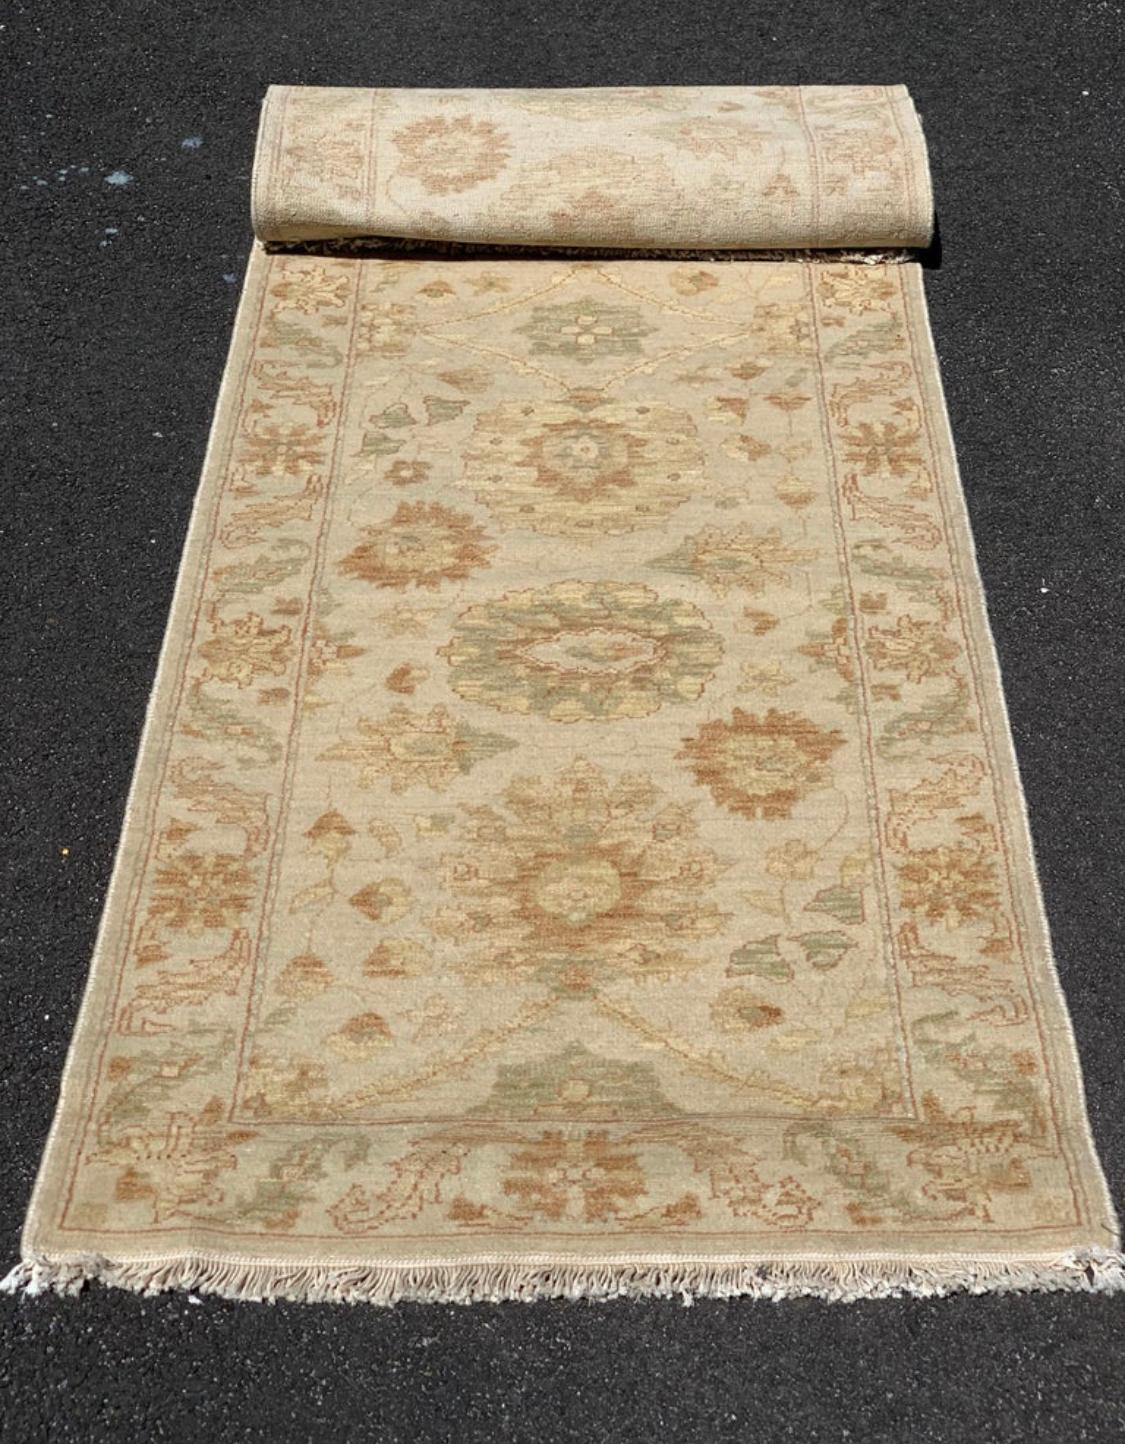 This is a new late 20th Century beige ivory floral Persian style runner rug handwoven in Alexandria, Egypt in 1990s. We manufactured these rugs and the design and colors were hand chosen by us and we have a wide variety of sizes in this style. This